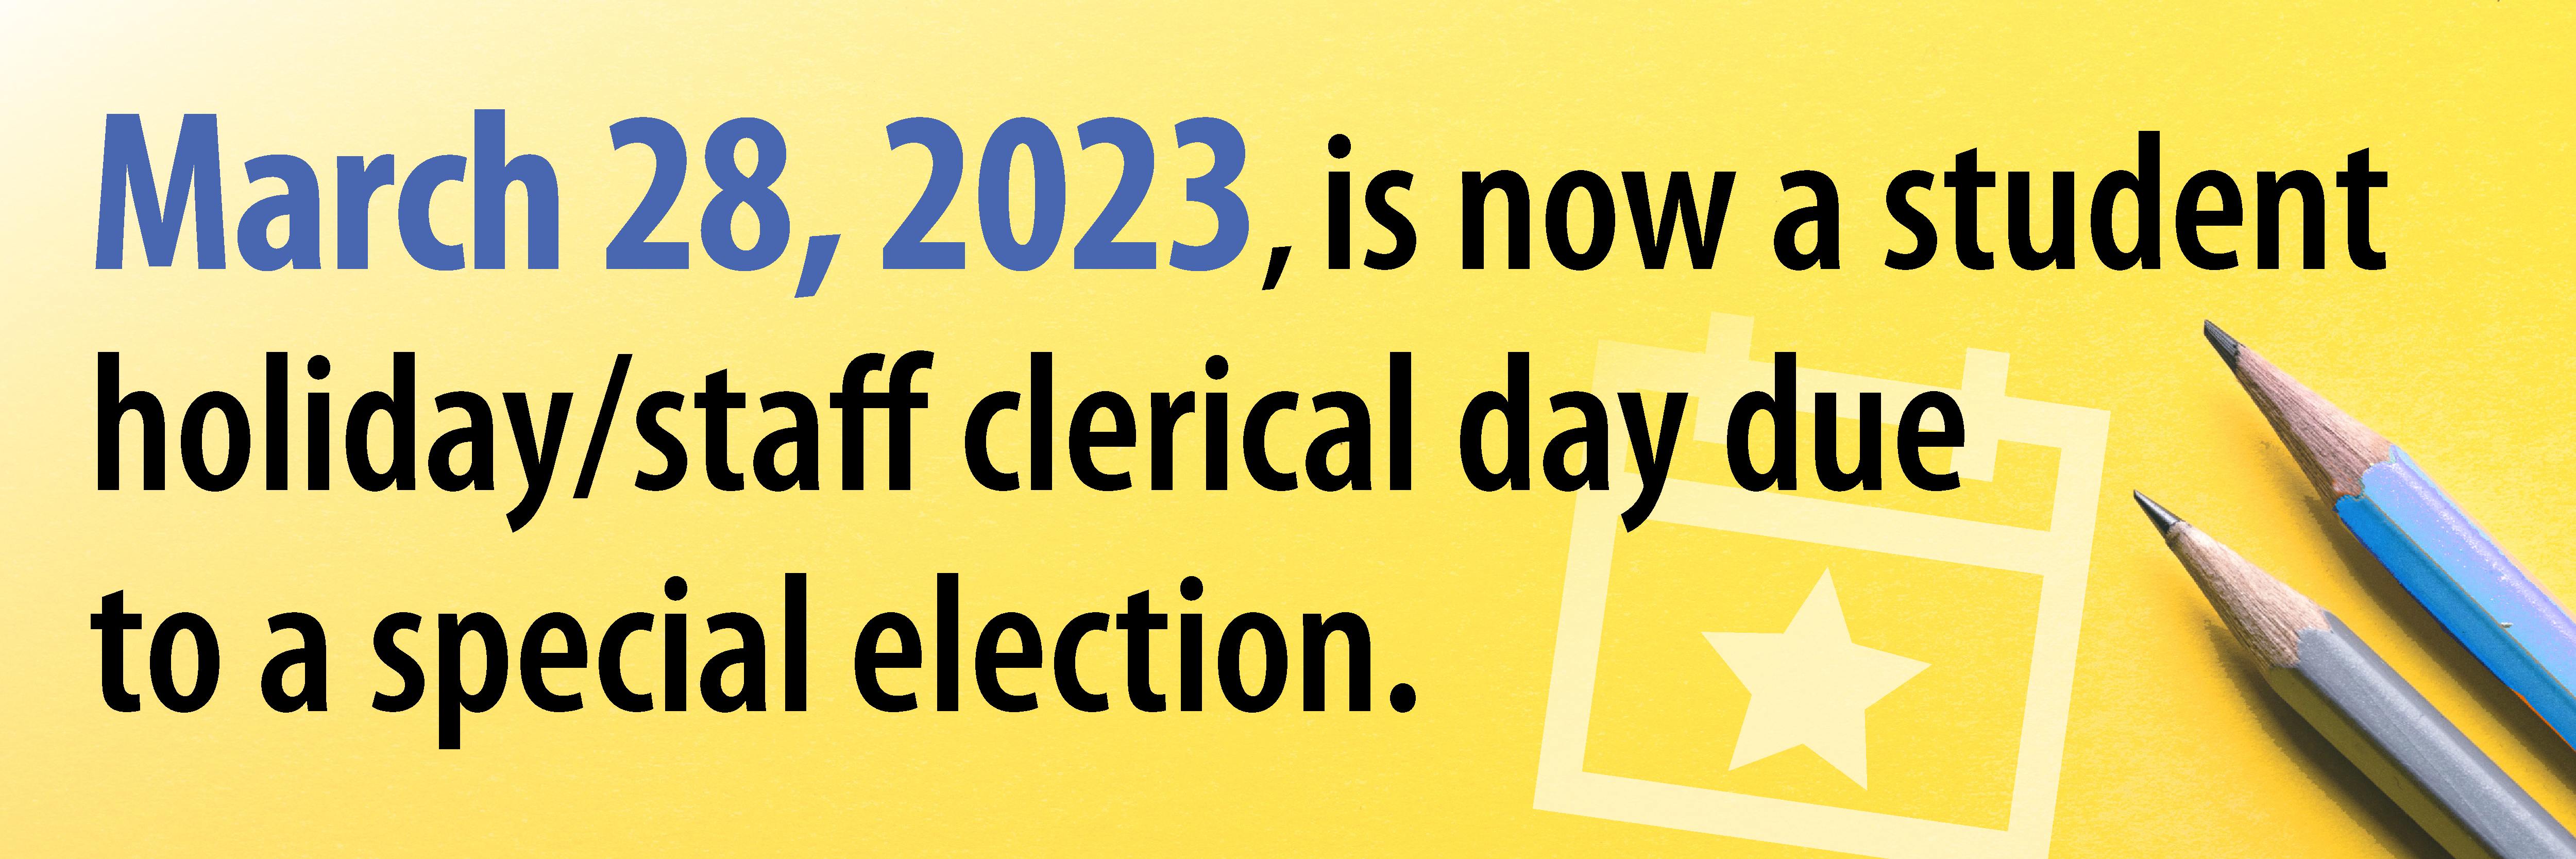 March 28, 2023, is now a student holiday/staff clerical day due to a special election.